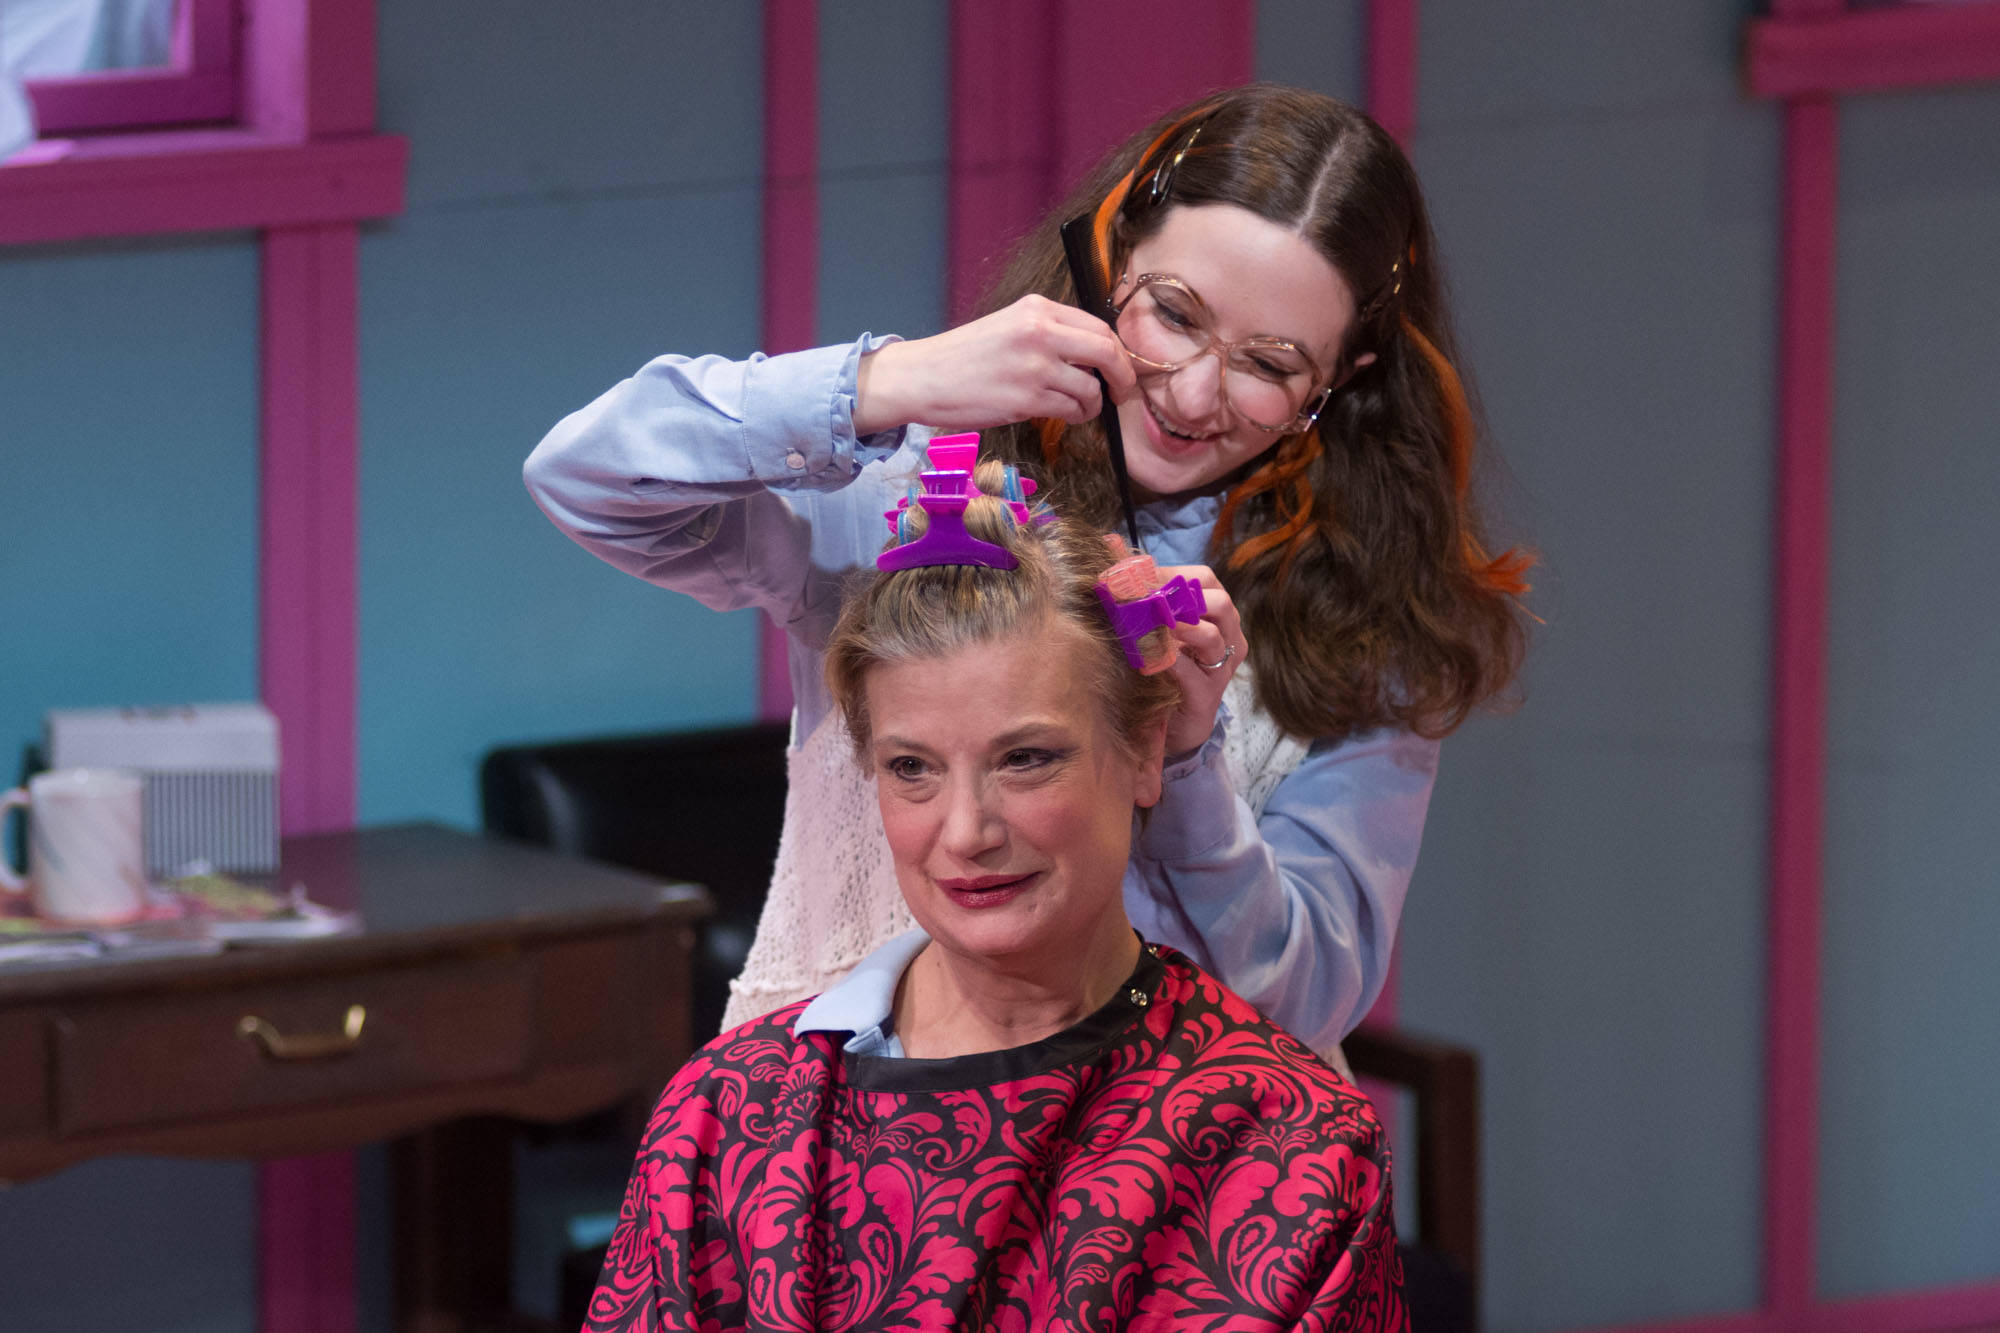 Sarah Everett as Annelle and Katie Jensen as M’Lynn in Perseverance Theatre’s production of “Steel Magnolias.” (Photo by Cameron Byrnes)